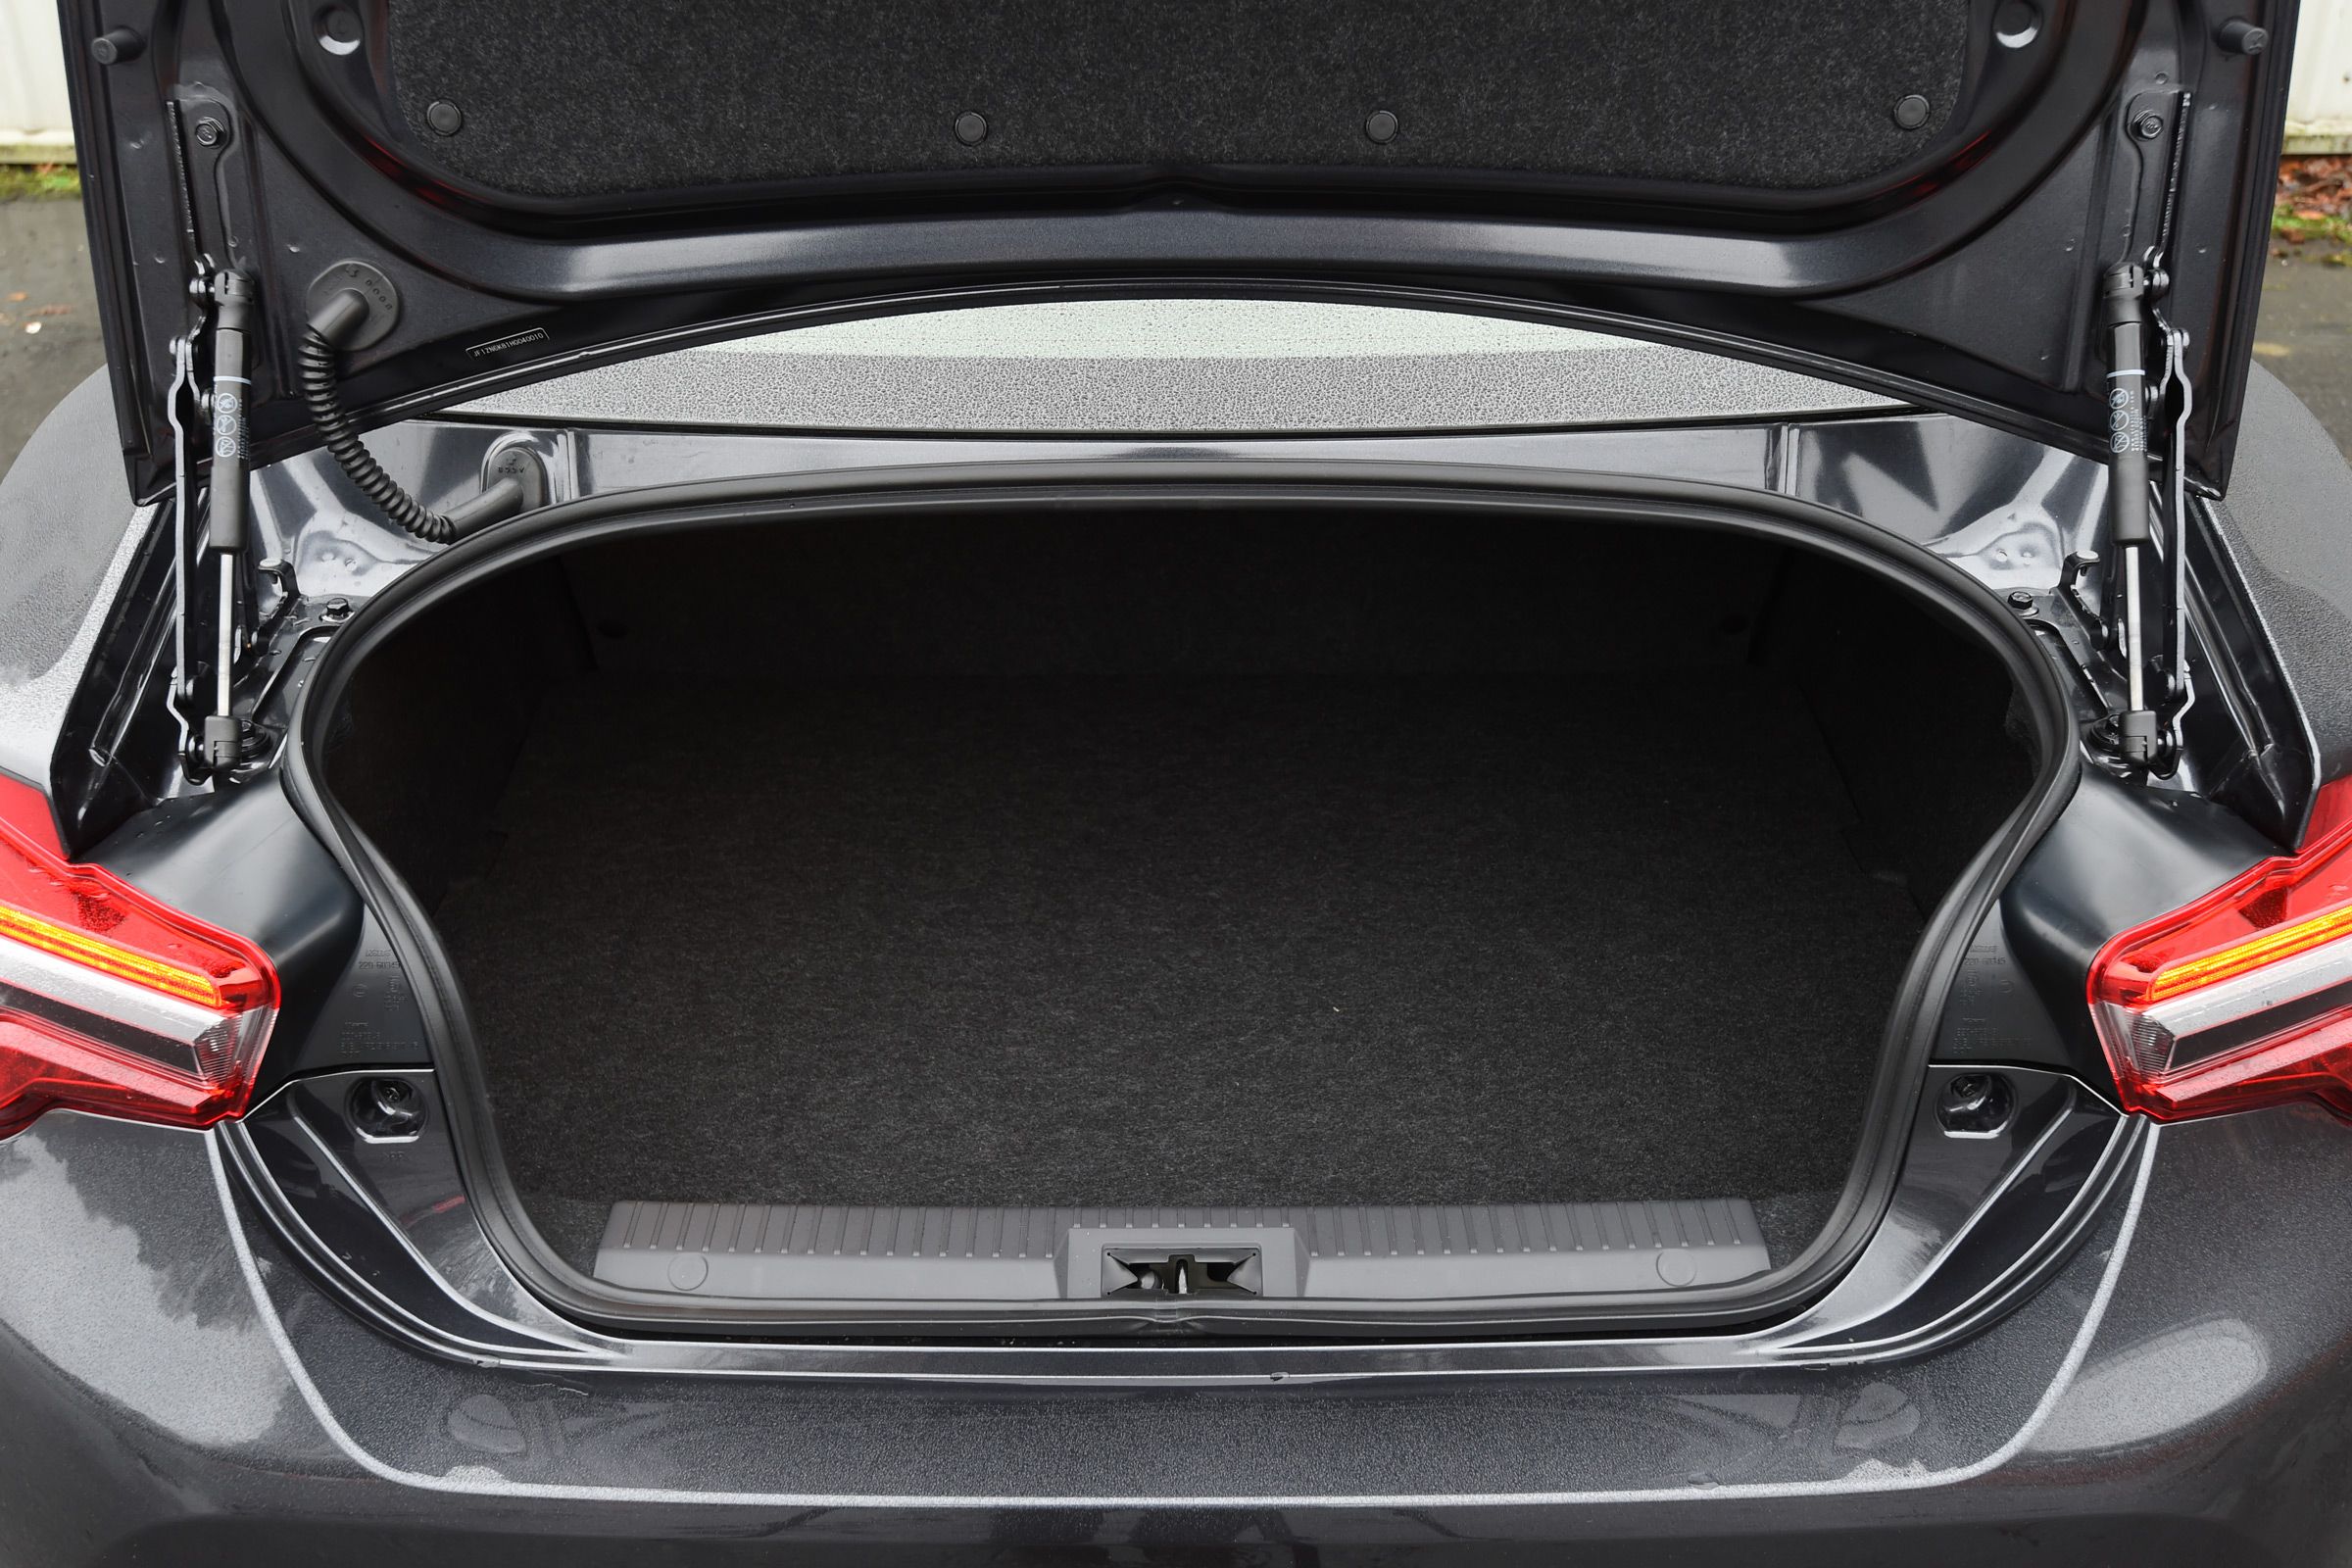 2017 Toyota GT86 Black Interior View Cargo Trunk (View 9 of 13)